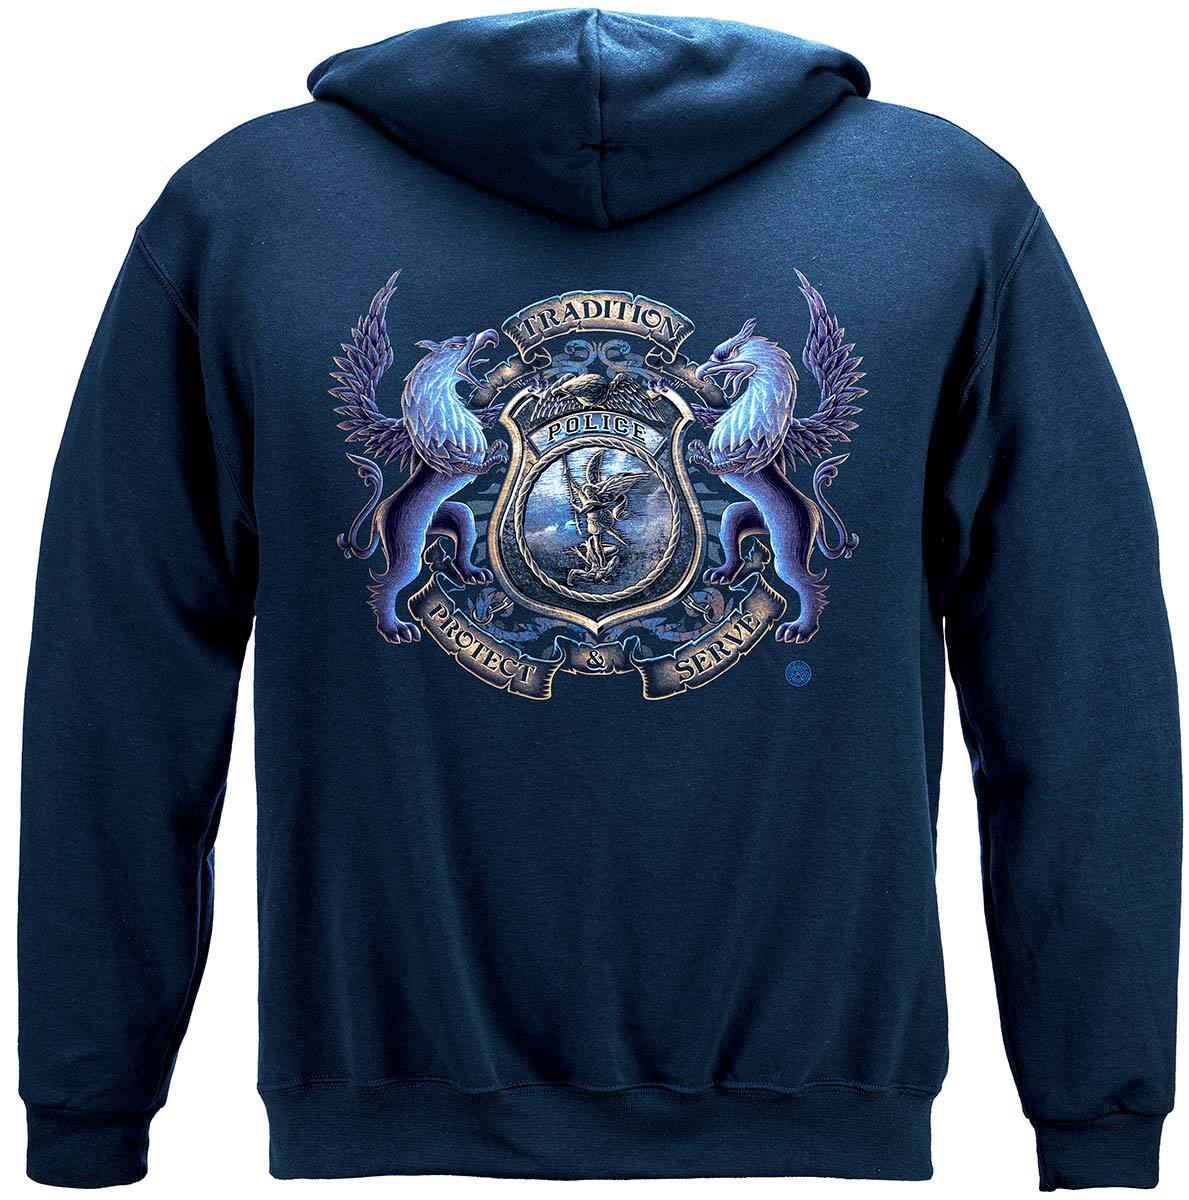 Police Coat of Arms Premium Hooded Sweat Shirt